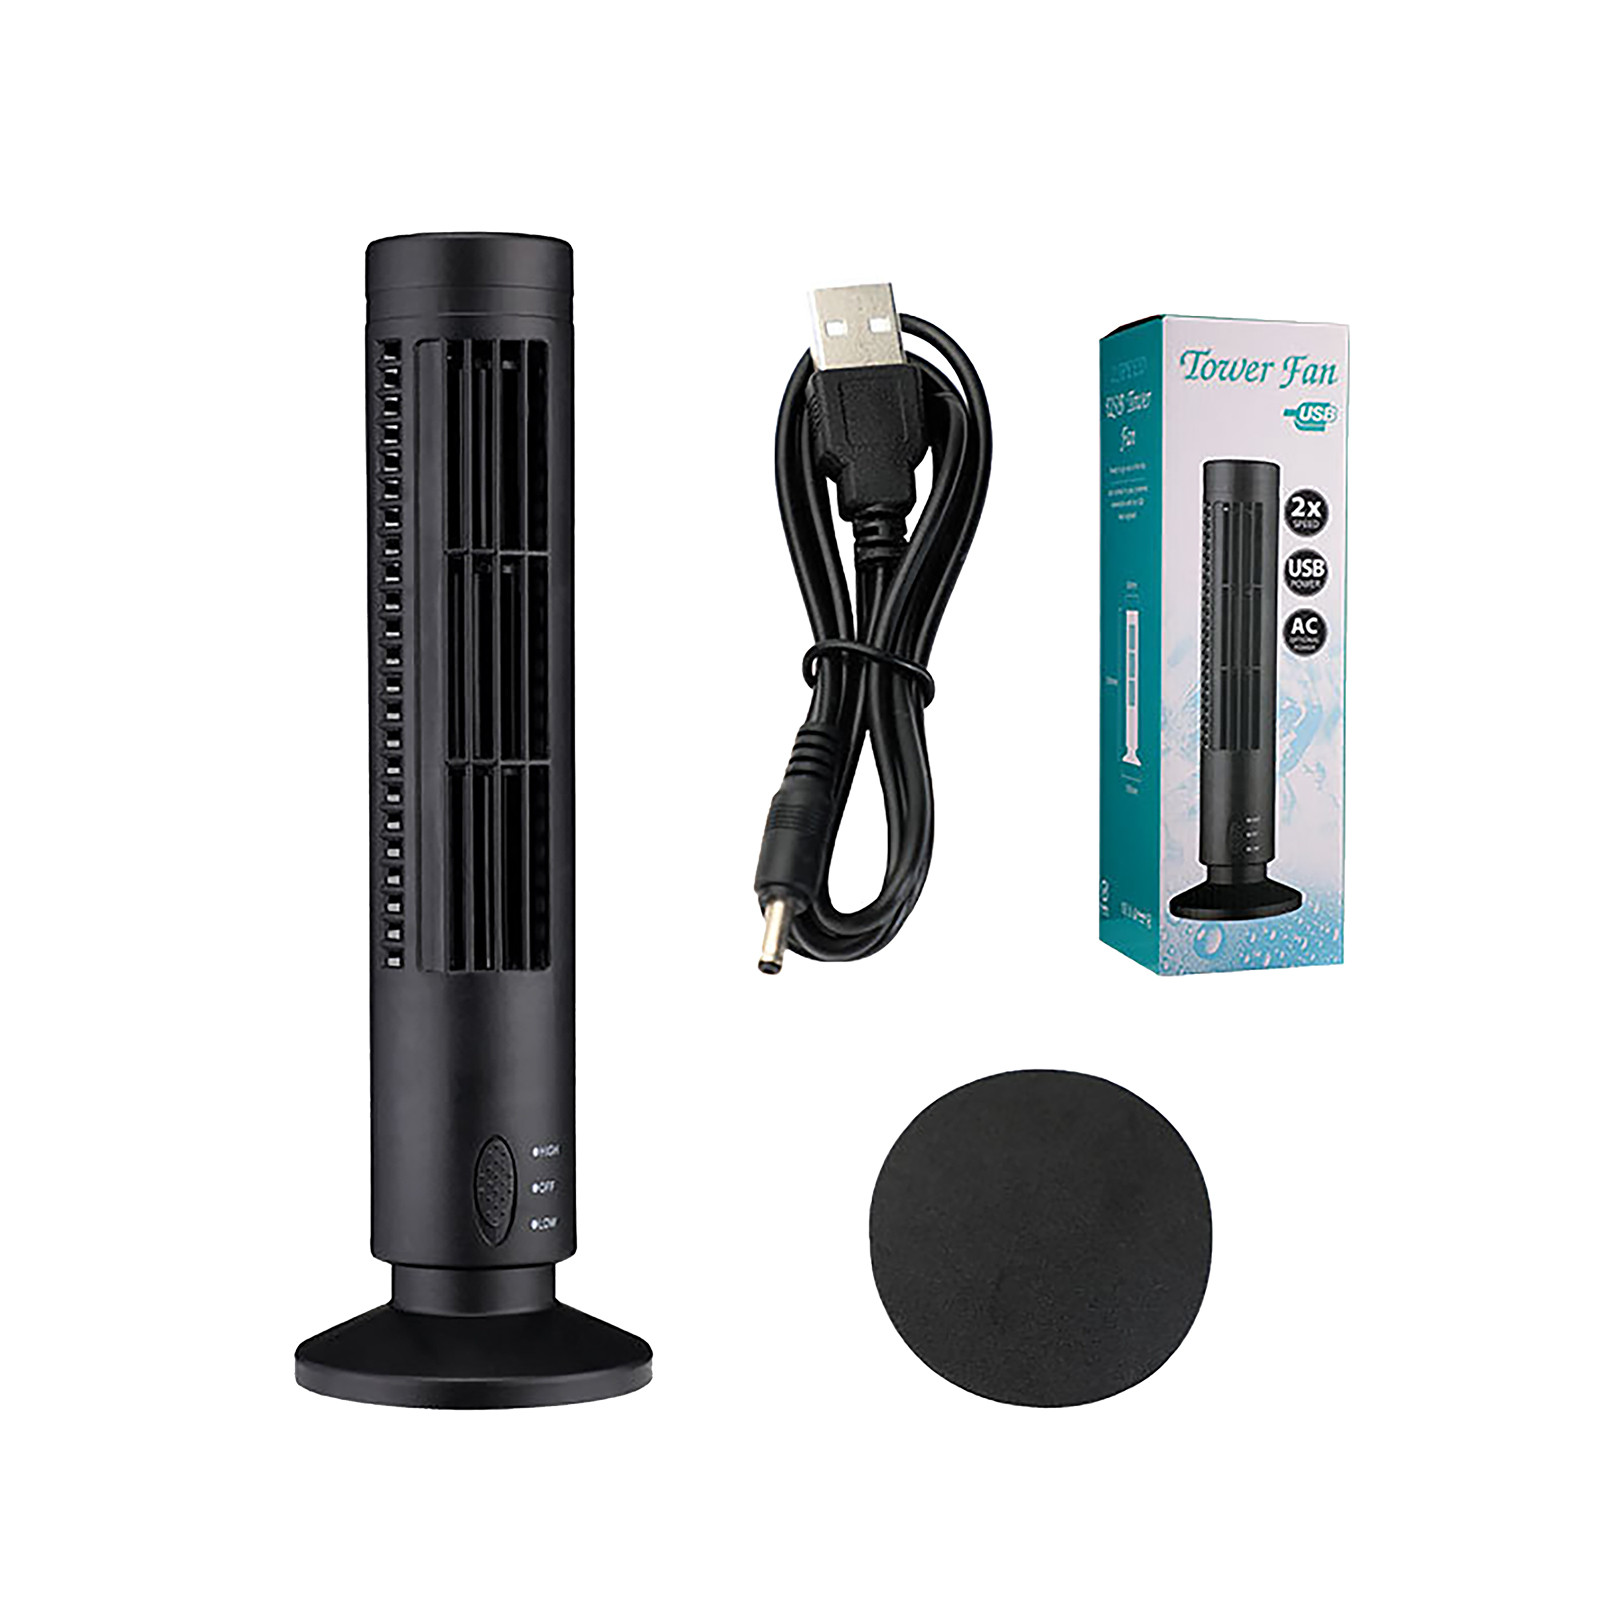 Wovilon Tower Fan for Bedroom, 24ft/s Velocity Quiet Cooling Fan, 90° Oscillating Fans for Indoors, Table Fan, Bladeless Fan, Standing Floor Fans, White - image 4 of 6